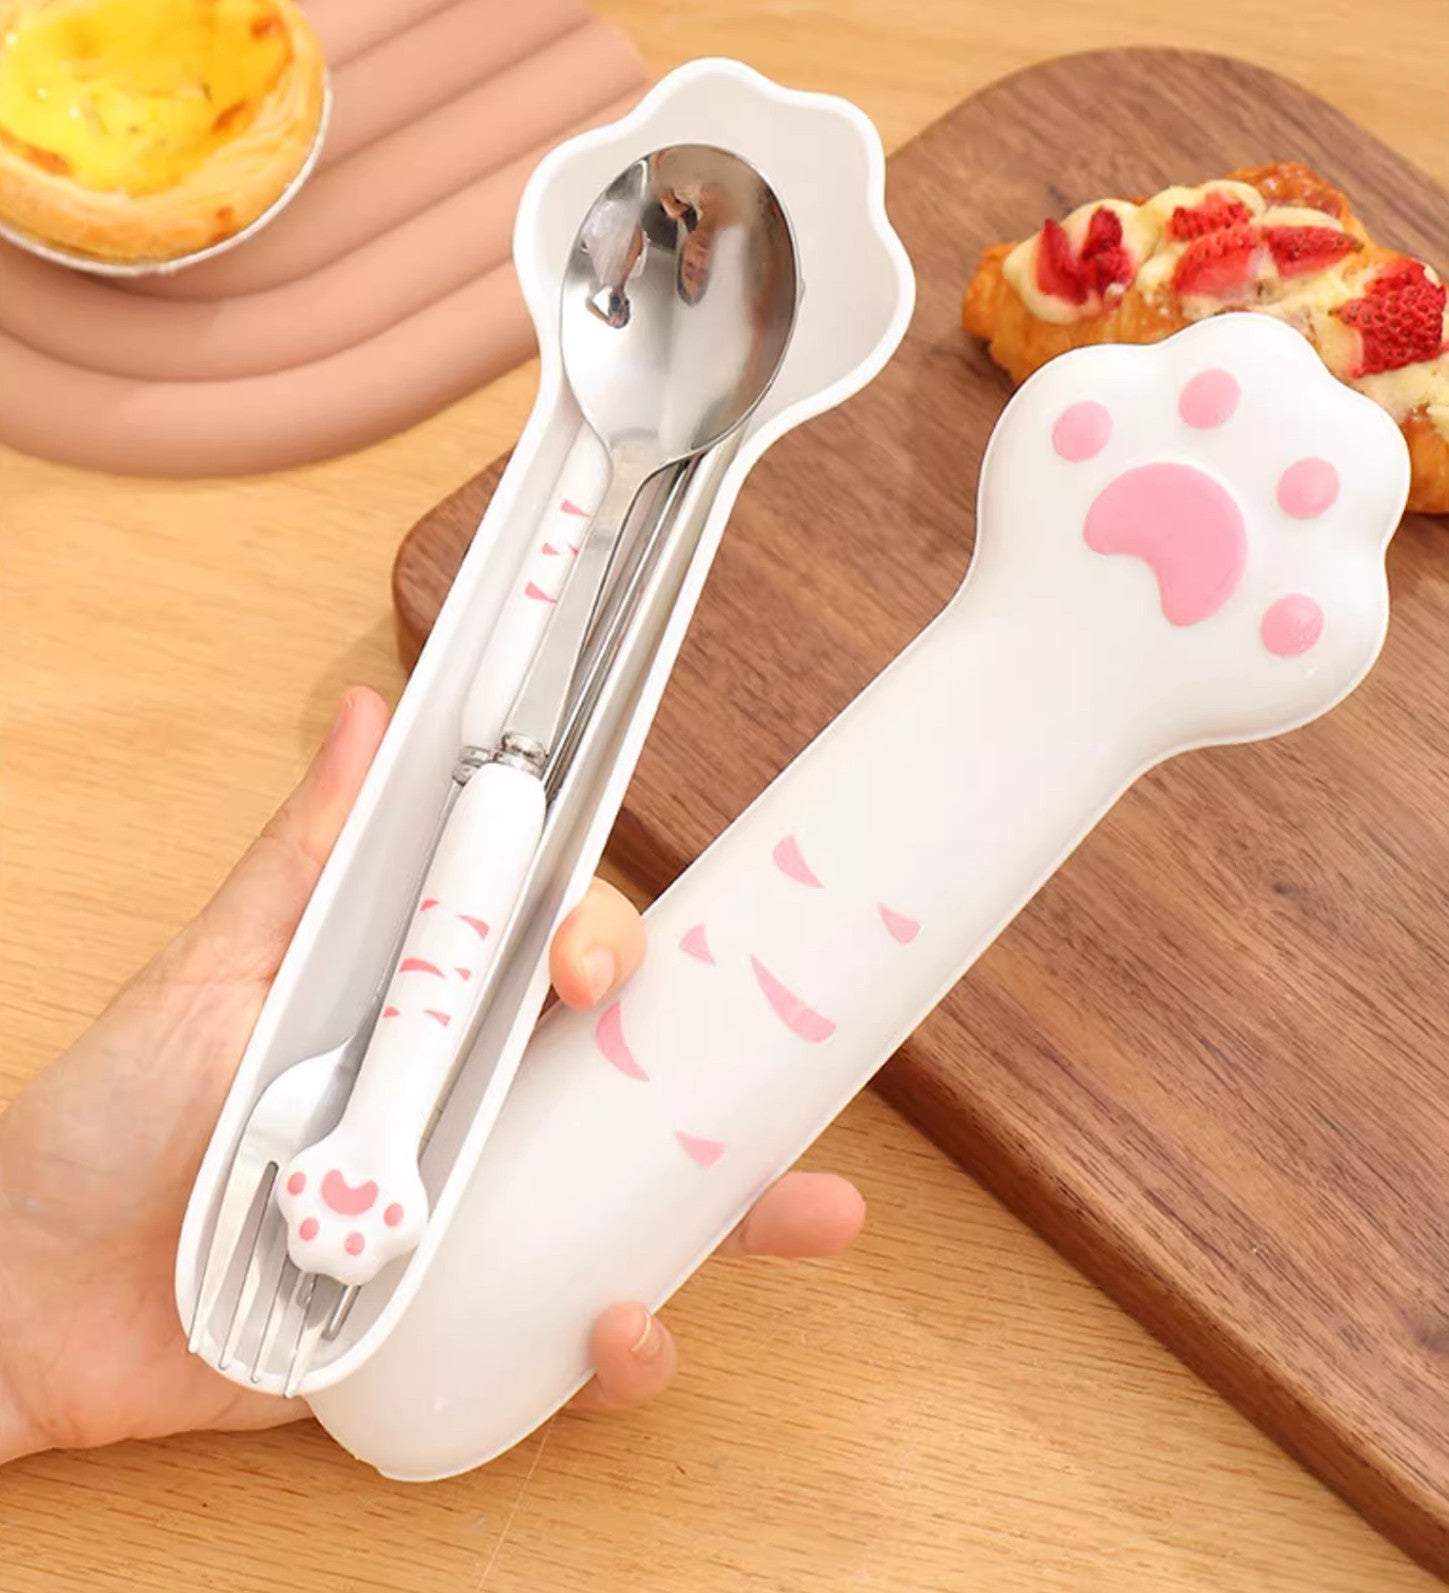 3pcs Cute Cat Paw Ceramic Cutlery Set Stainless Steel Tableware Spoon Fork  Chopsticks Set Portable Reusable Utensils Set With Case For Travel Camping  Office Lunch, 24/7 Customer Service